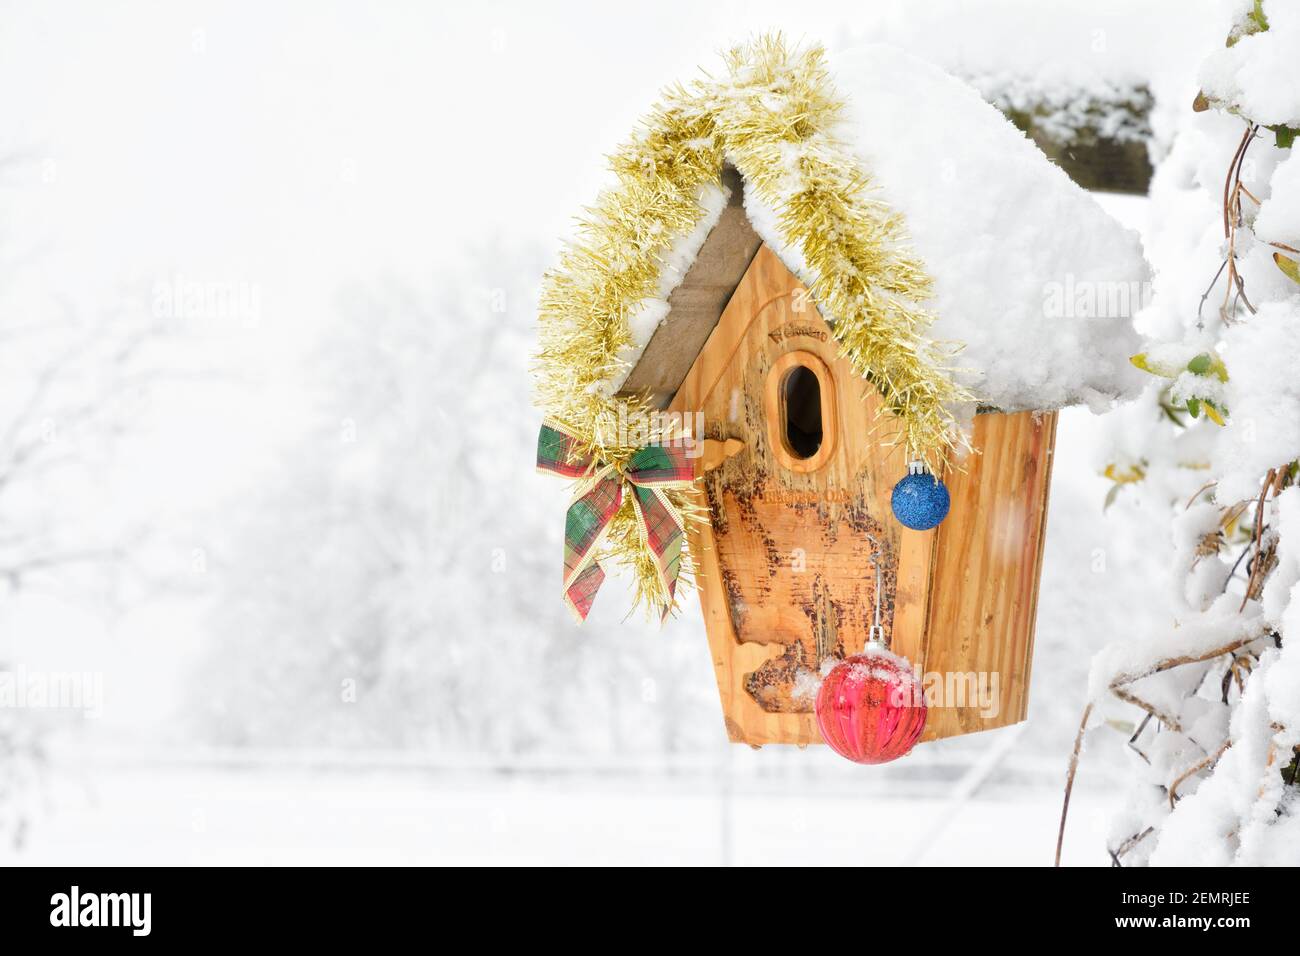 Birdhouse decorated with Christmas ornaments in heavy snowfall; with copy space Stock Photo